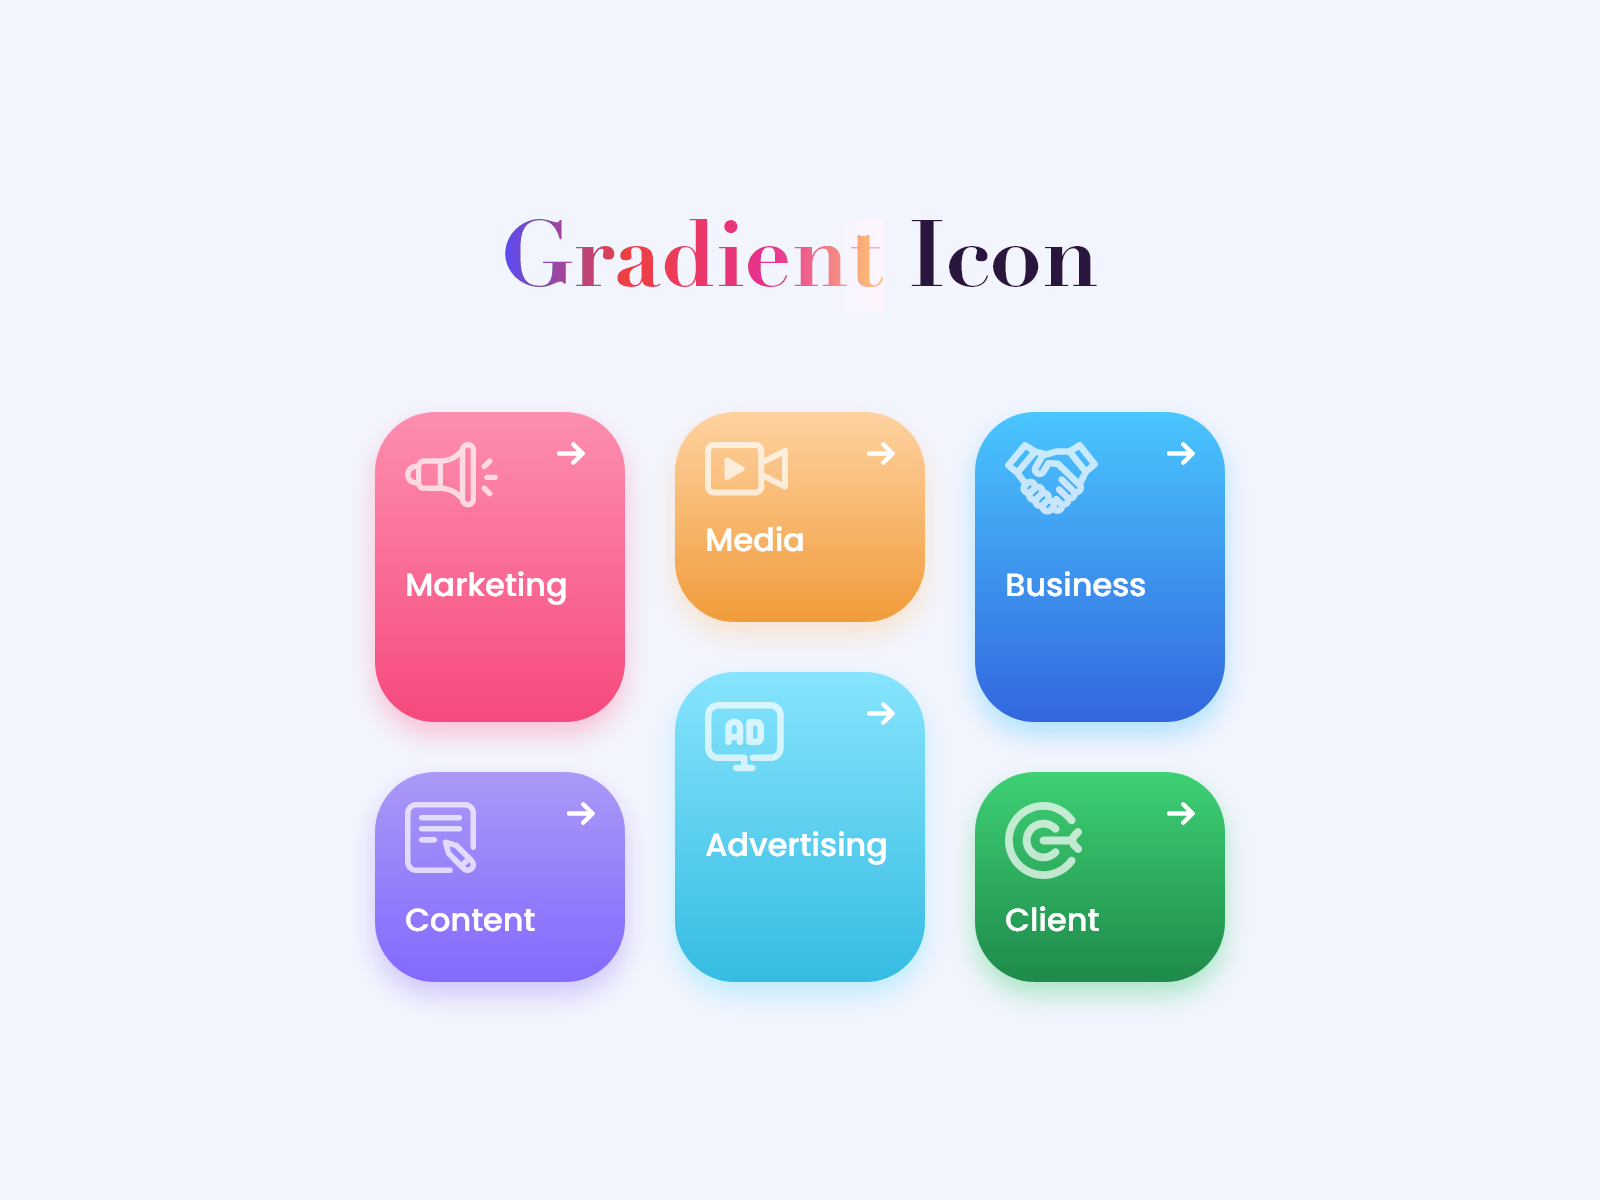 Gradient Subject Card by Dhanetra Singh Negi on Dribbble